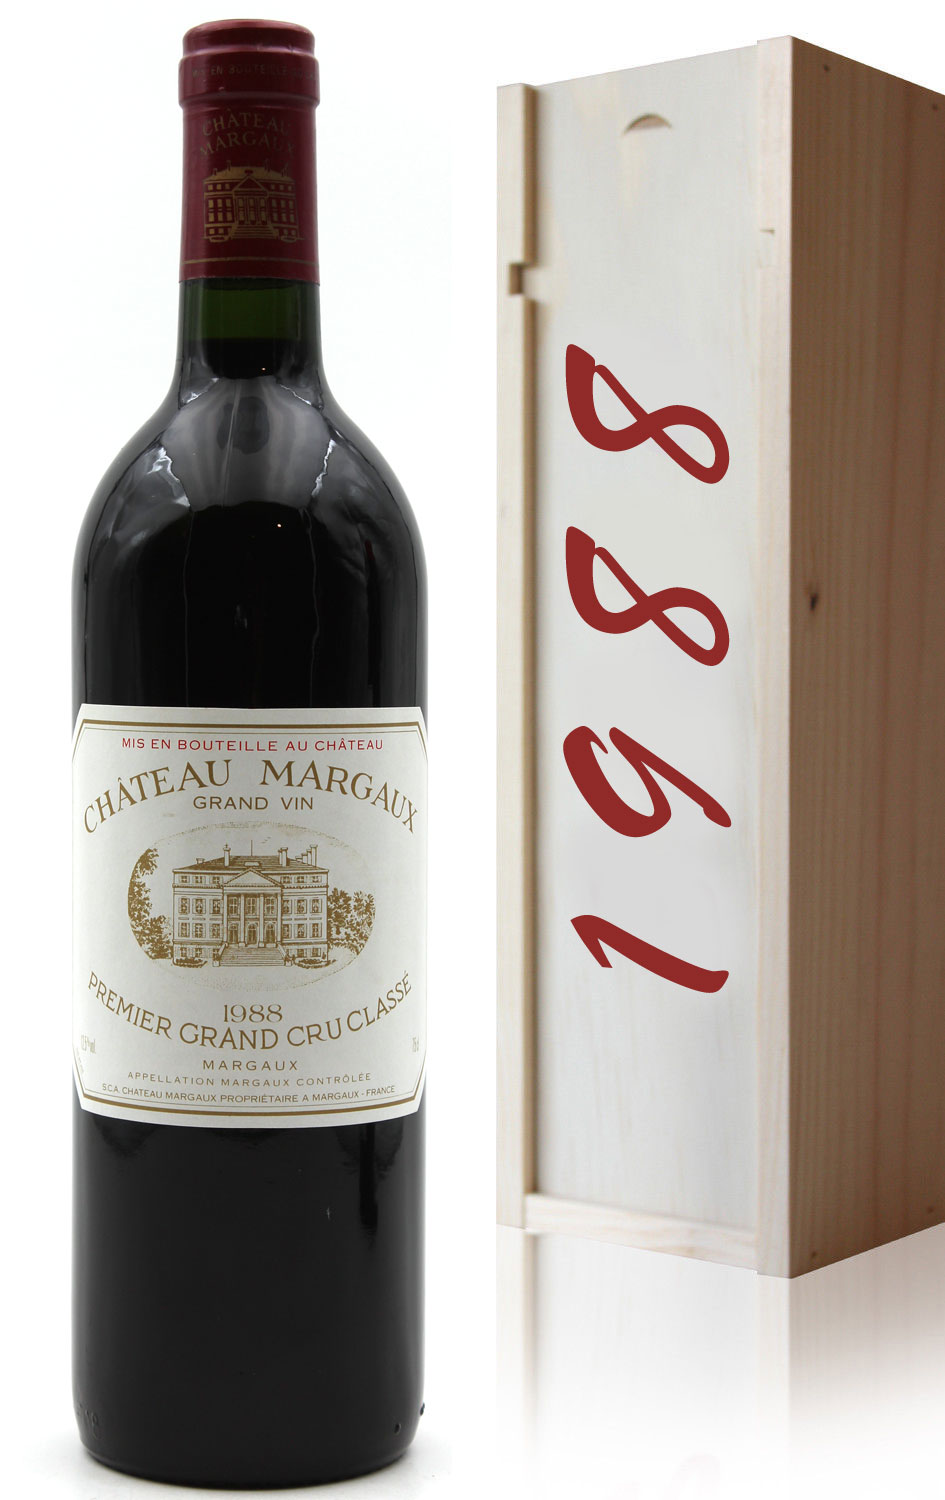 Chateau-Margaux-1988-gift